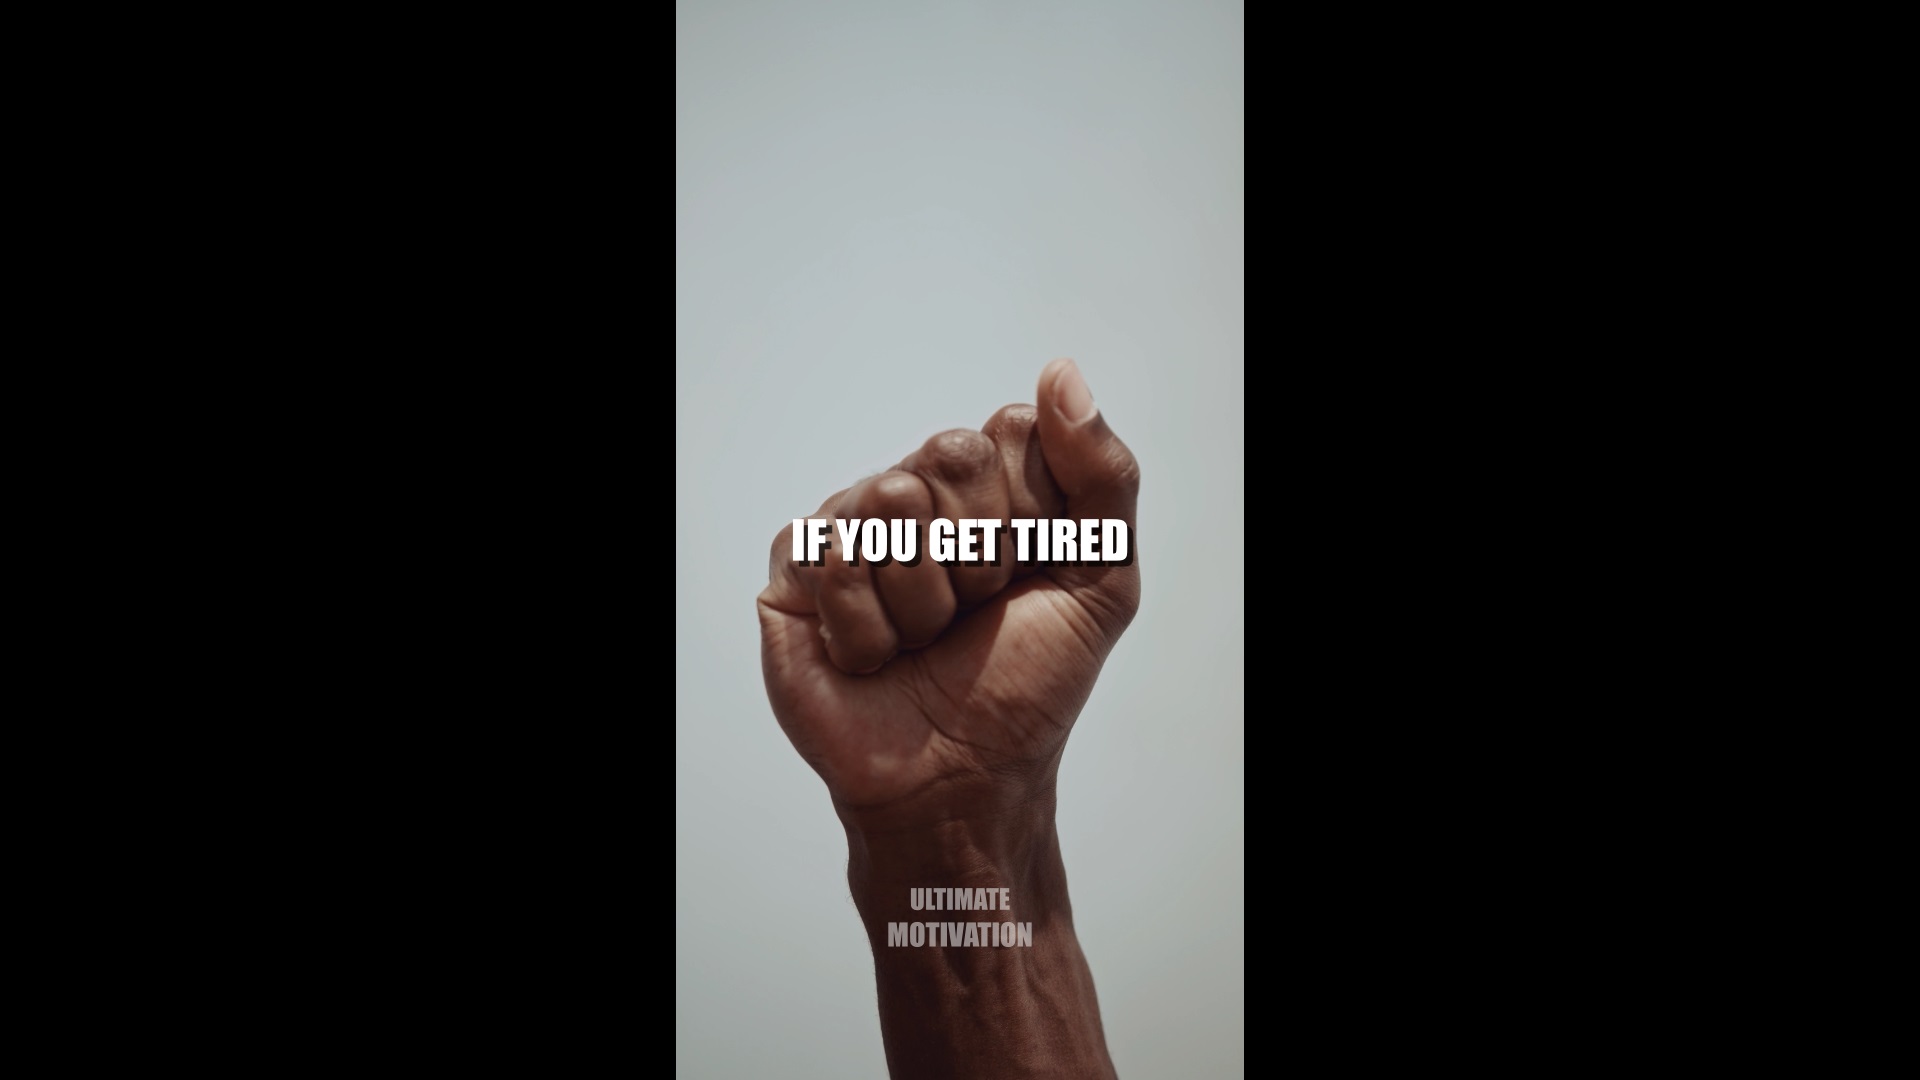 Learn to Rest, Not to Quit! If you get tired, learn to rest, not to quit! Muhammad Ali's motivational video